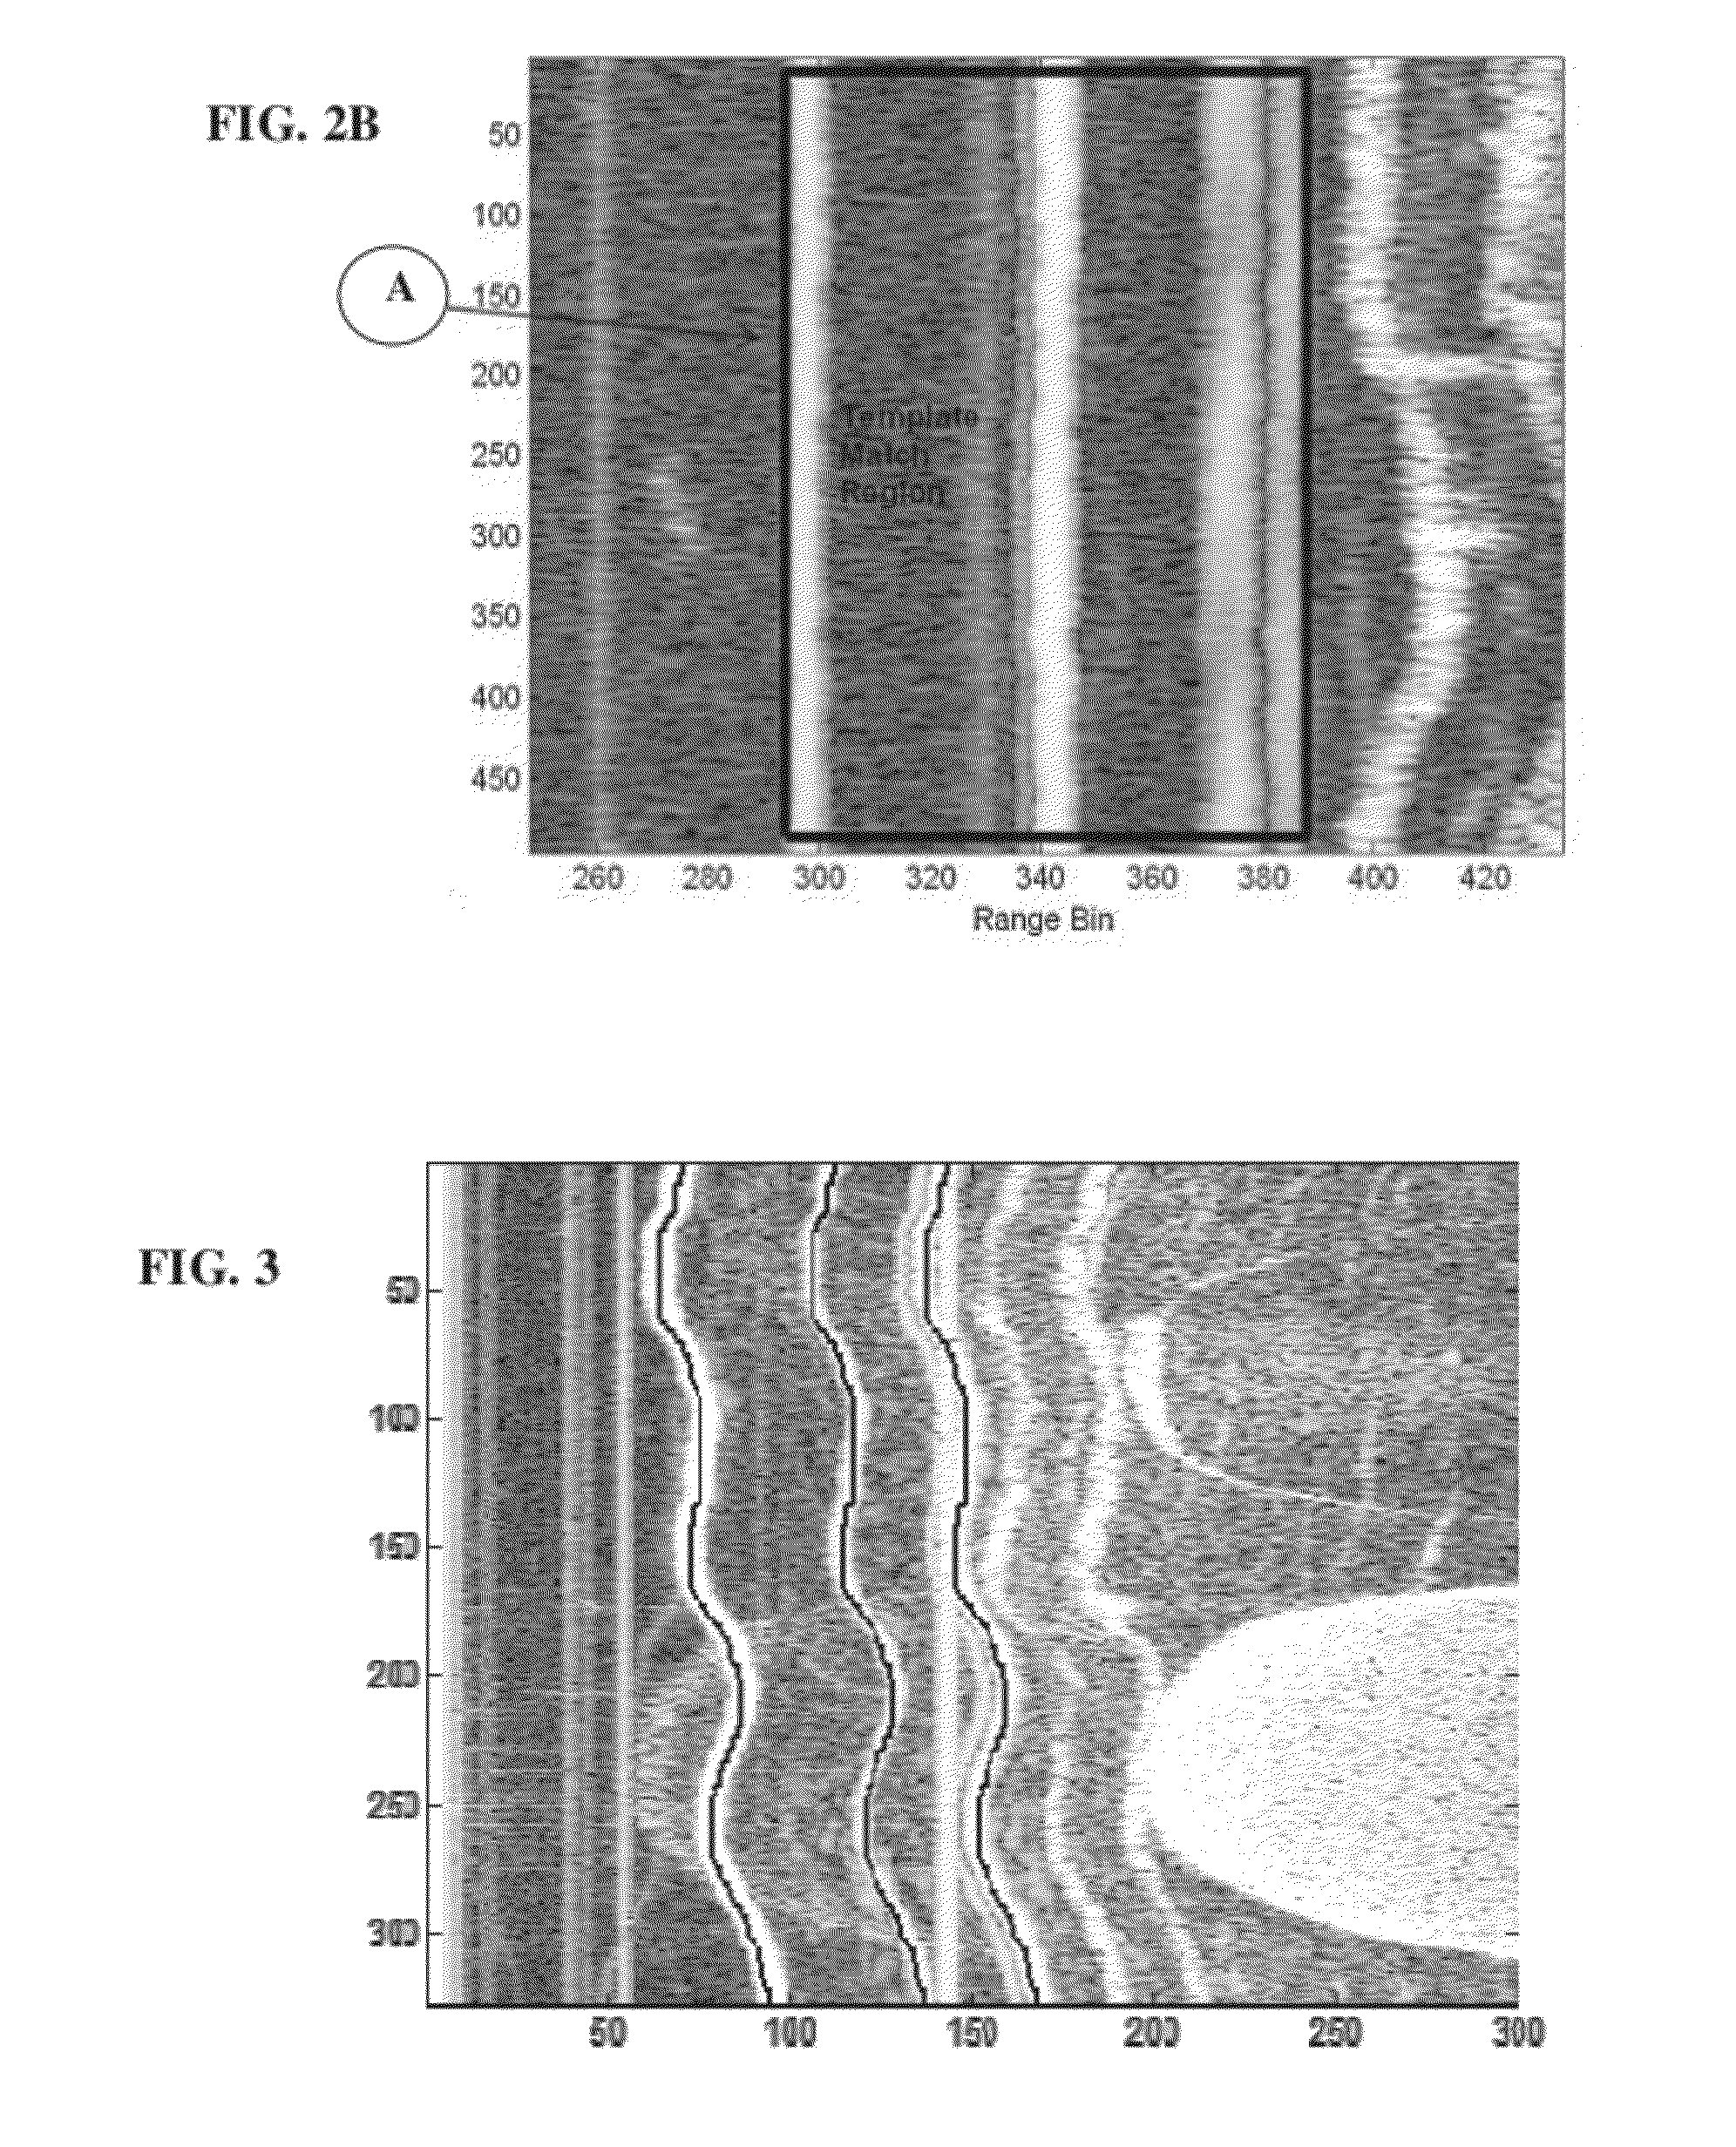 Automatic calibration systems and methods of use